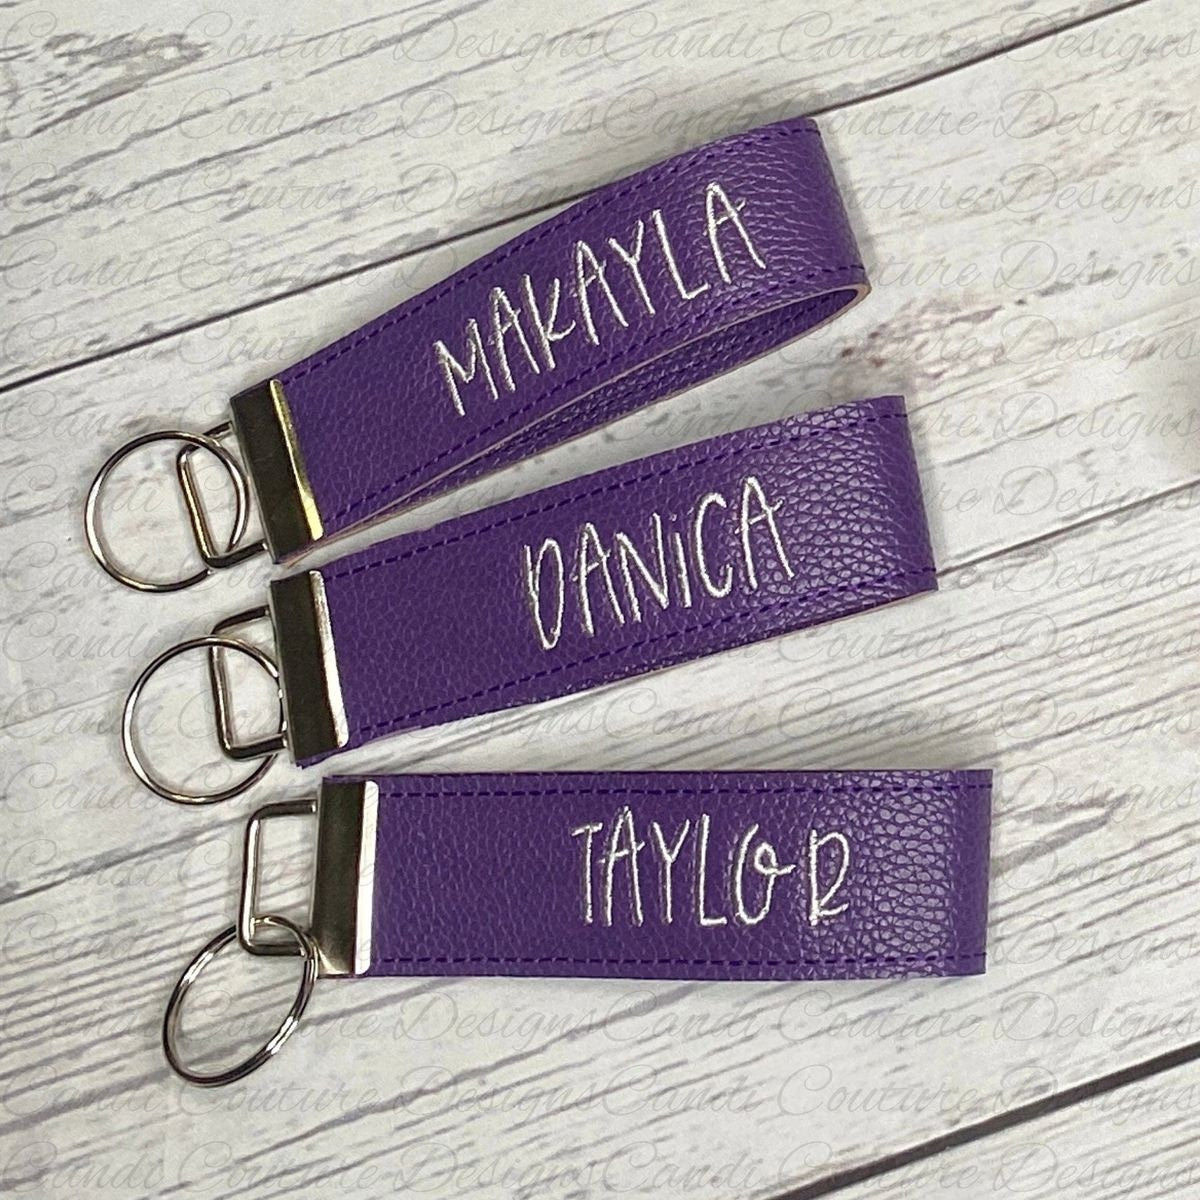 Customizable keychain featuring Gothic/Tattoo font and your name